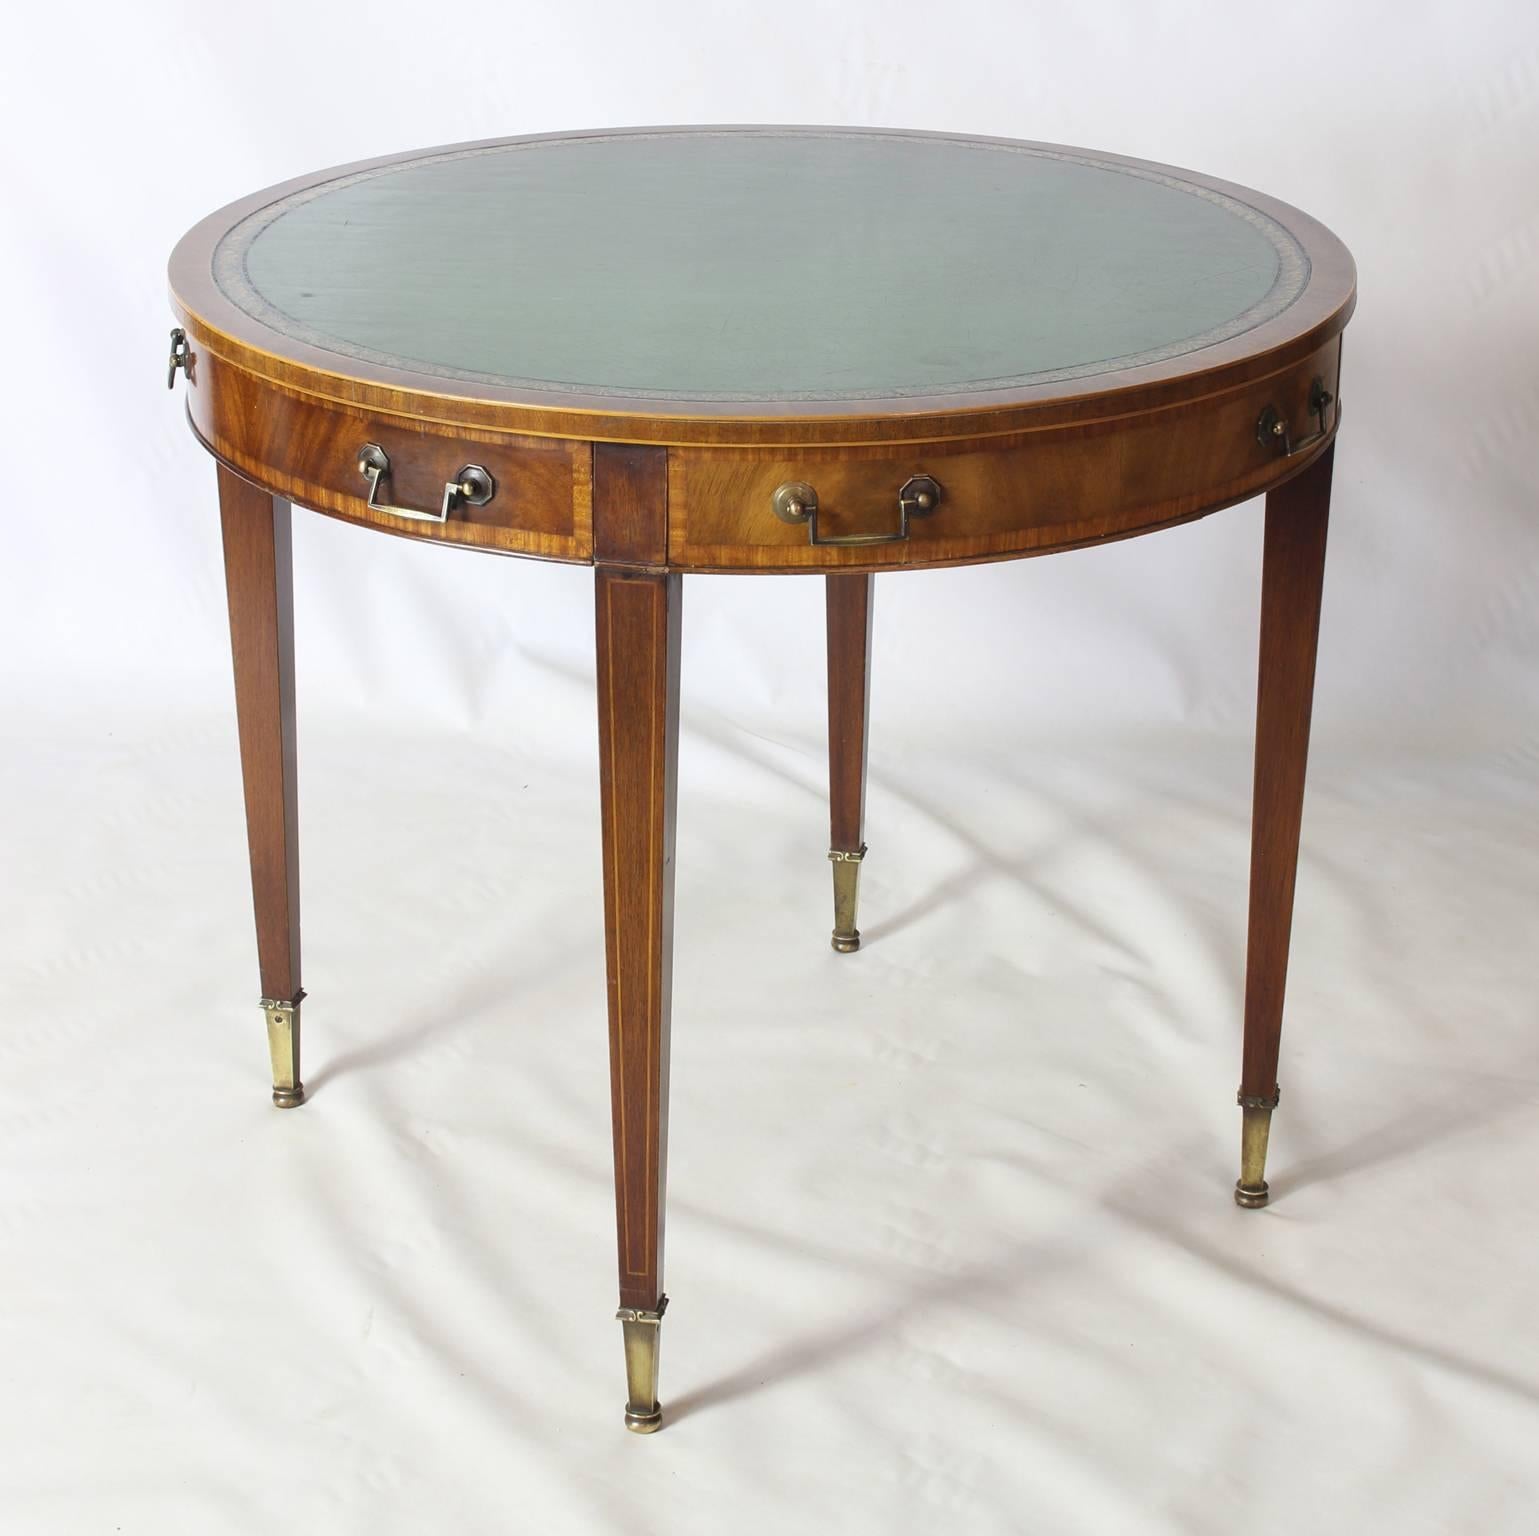 An elegant early 20th century Regency style green leather top drum table with three simulated and one real drawers resting on four square tapering legs terminating in brass cast feet.